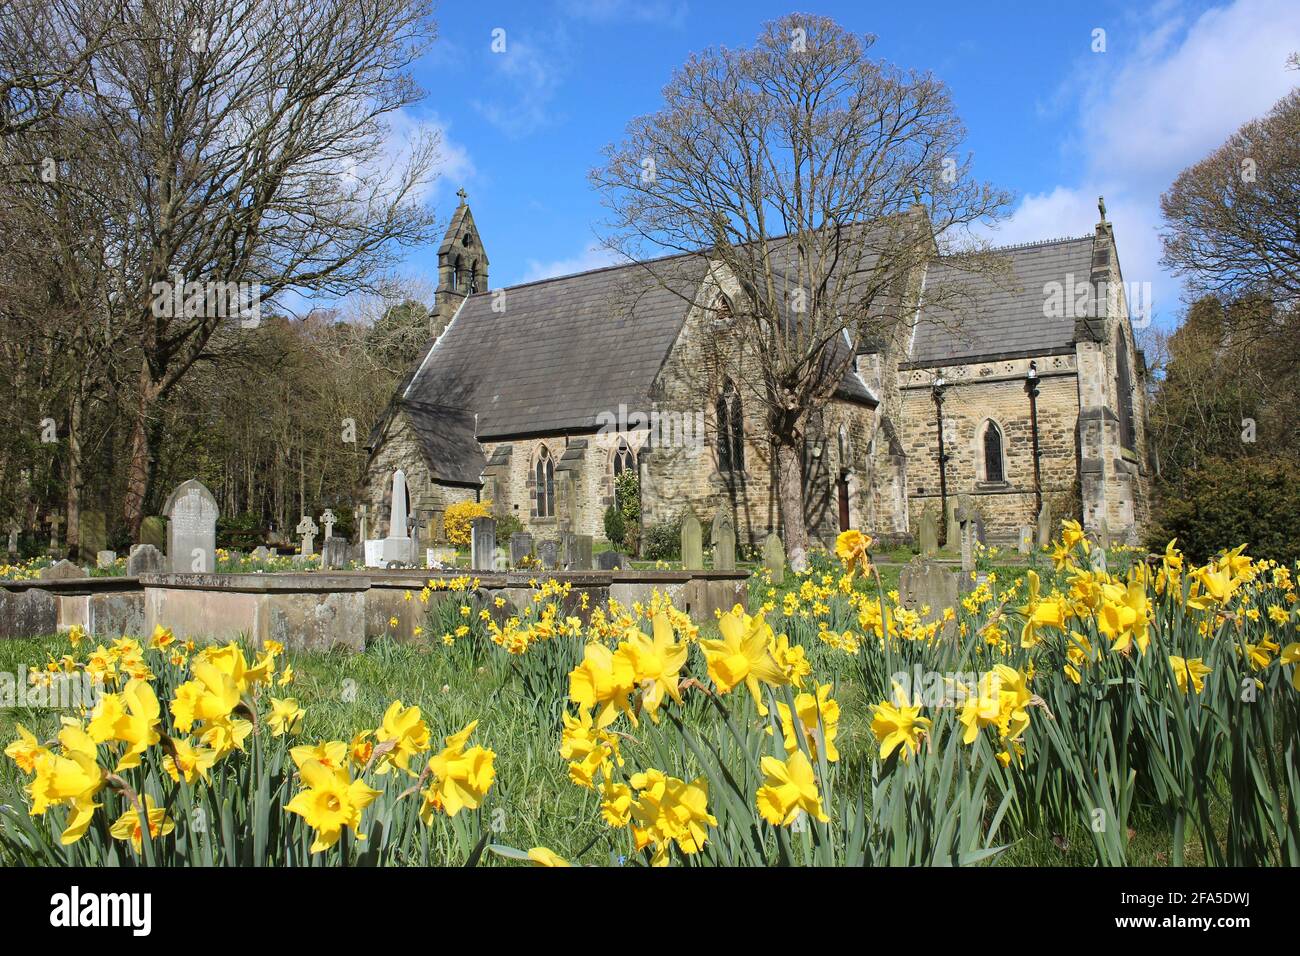 Spring Daffodils In The Graveyard Of St Luke's Church, Formby, Merseyside Stock Photo